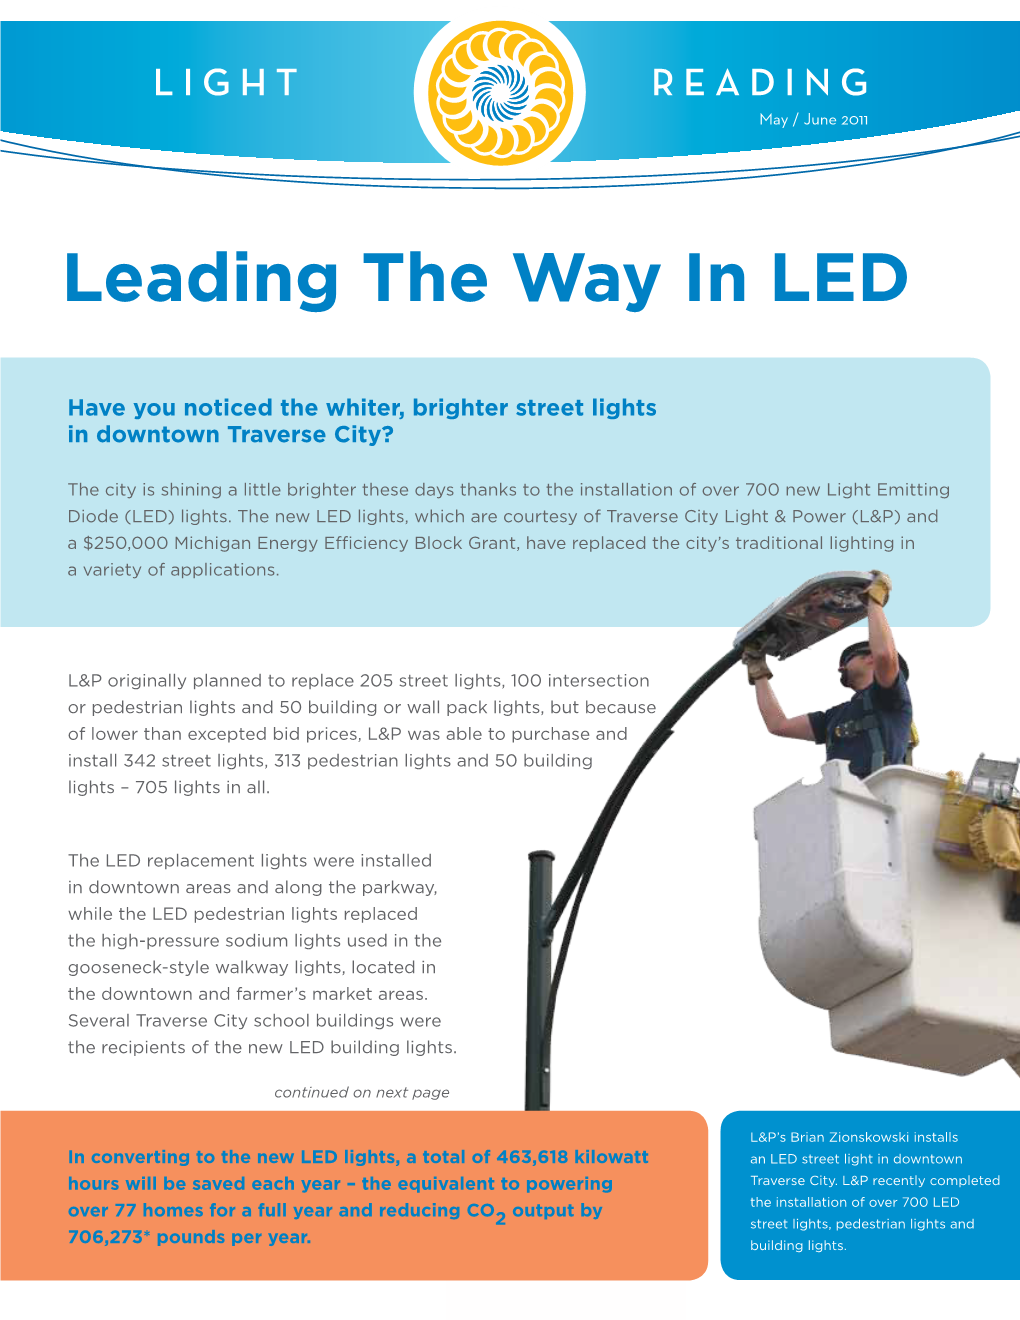 Leading the Way in LED & More